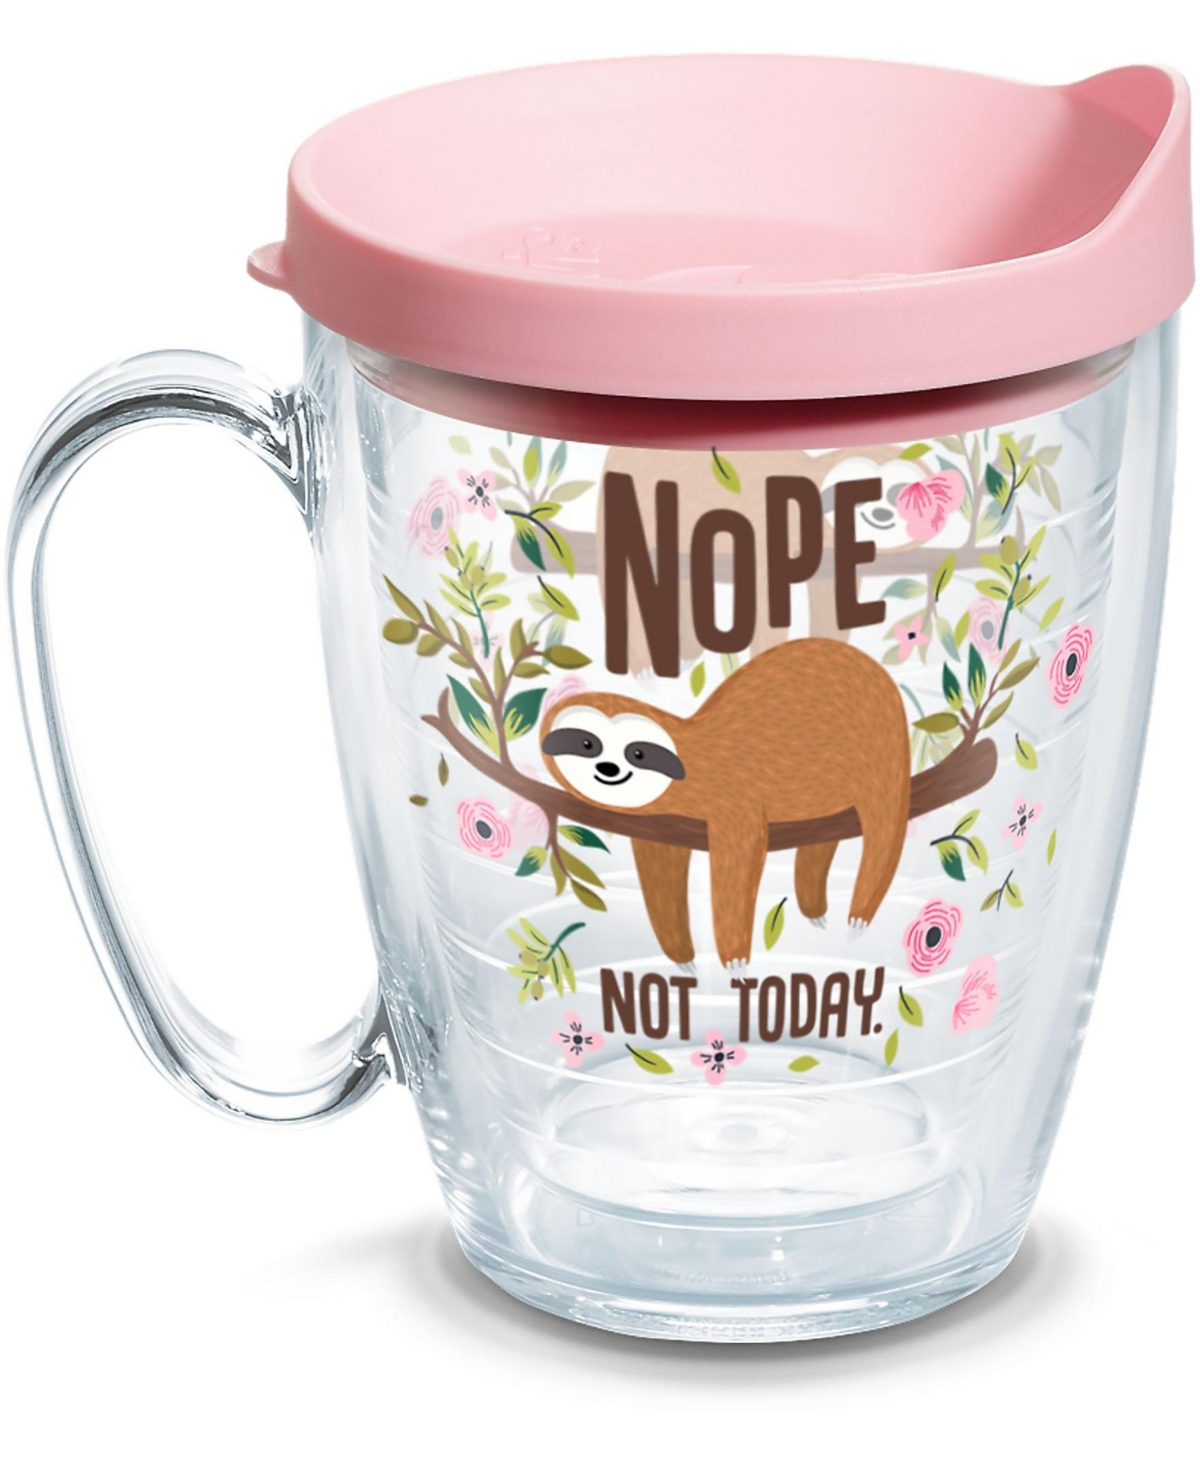 Tervis Tumbler Tervis Sloth Nope Not Today Made In Usa Double Walled Insulated Tumbler Travel Cup Keeps Drinks Cold In Open Miscellaneous